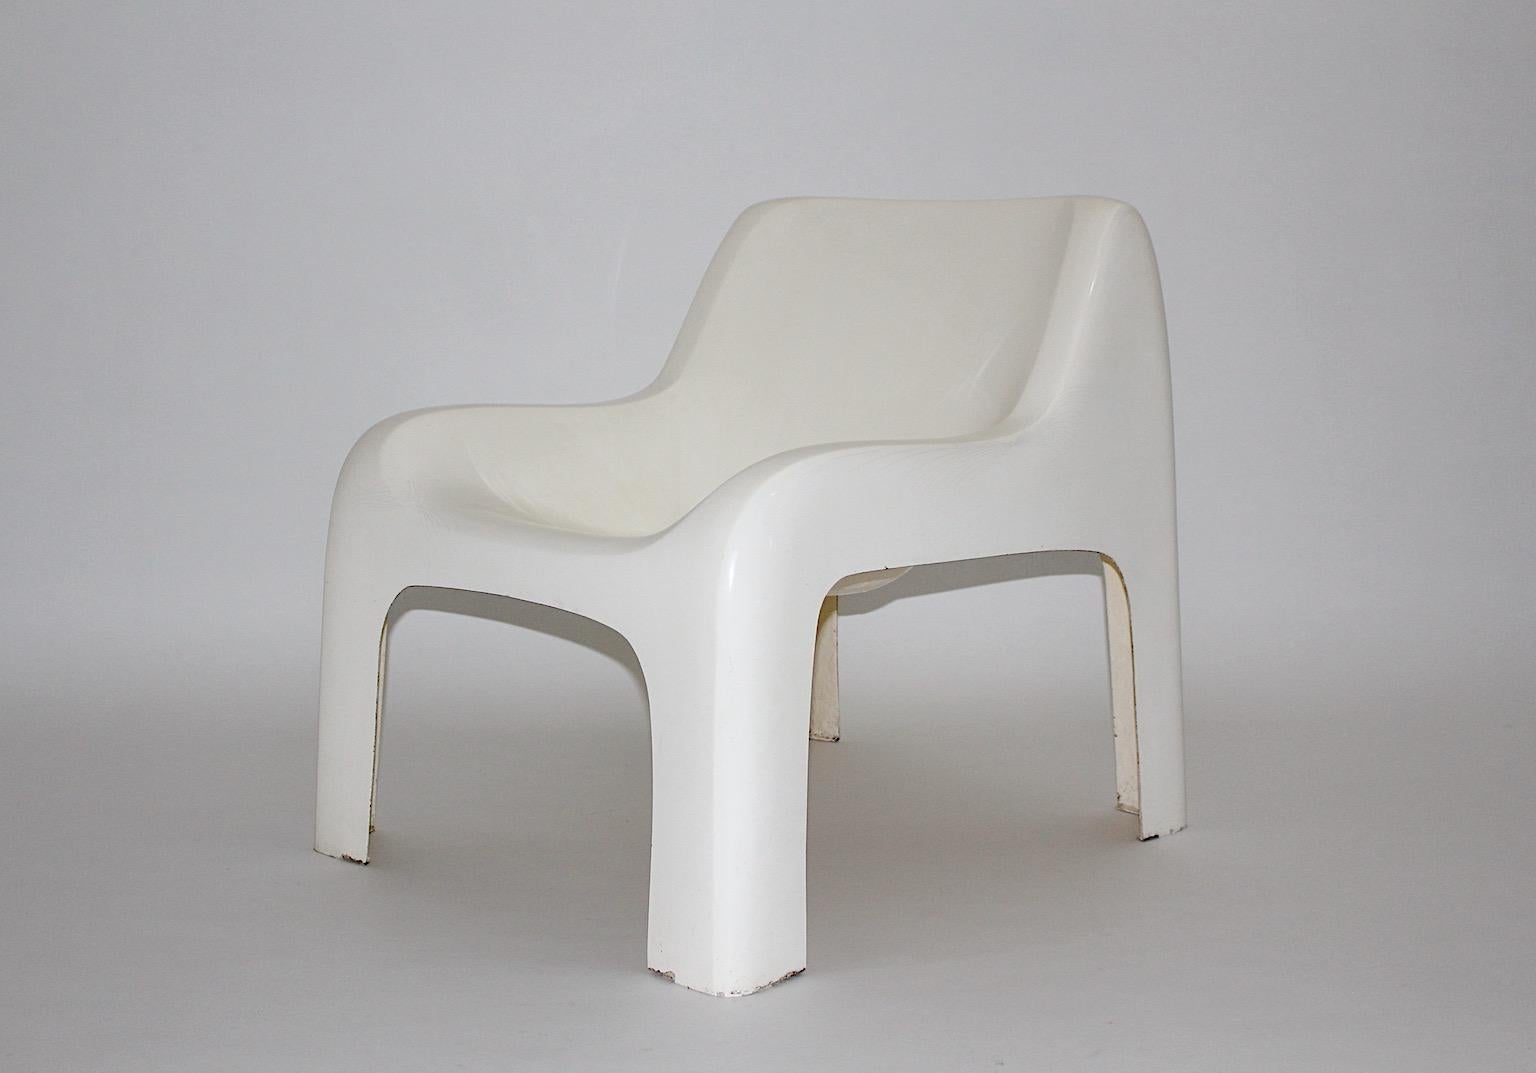 Space Age Vintage Plastic White Lounge Chair Ahti Kotikoski Anatomia 1968  In Good Condition For Sale In Vienna, AT